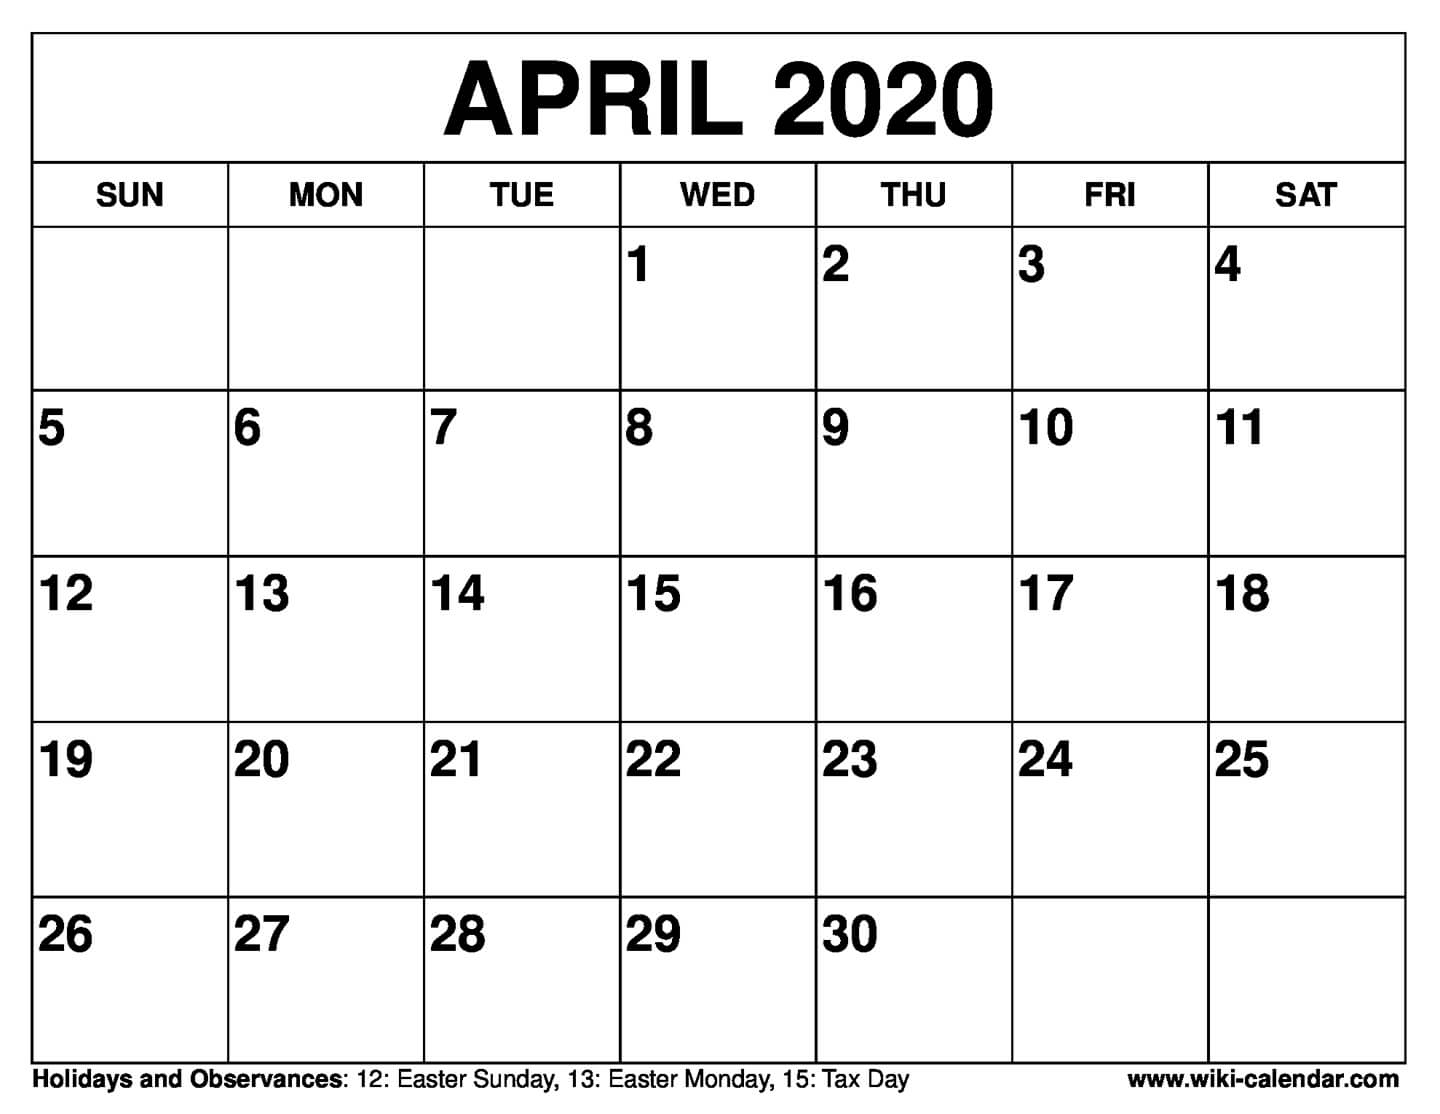 Download And Print Calendars For 2020 - Wiki Calendar